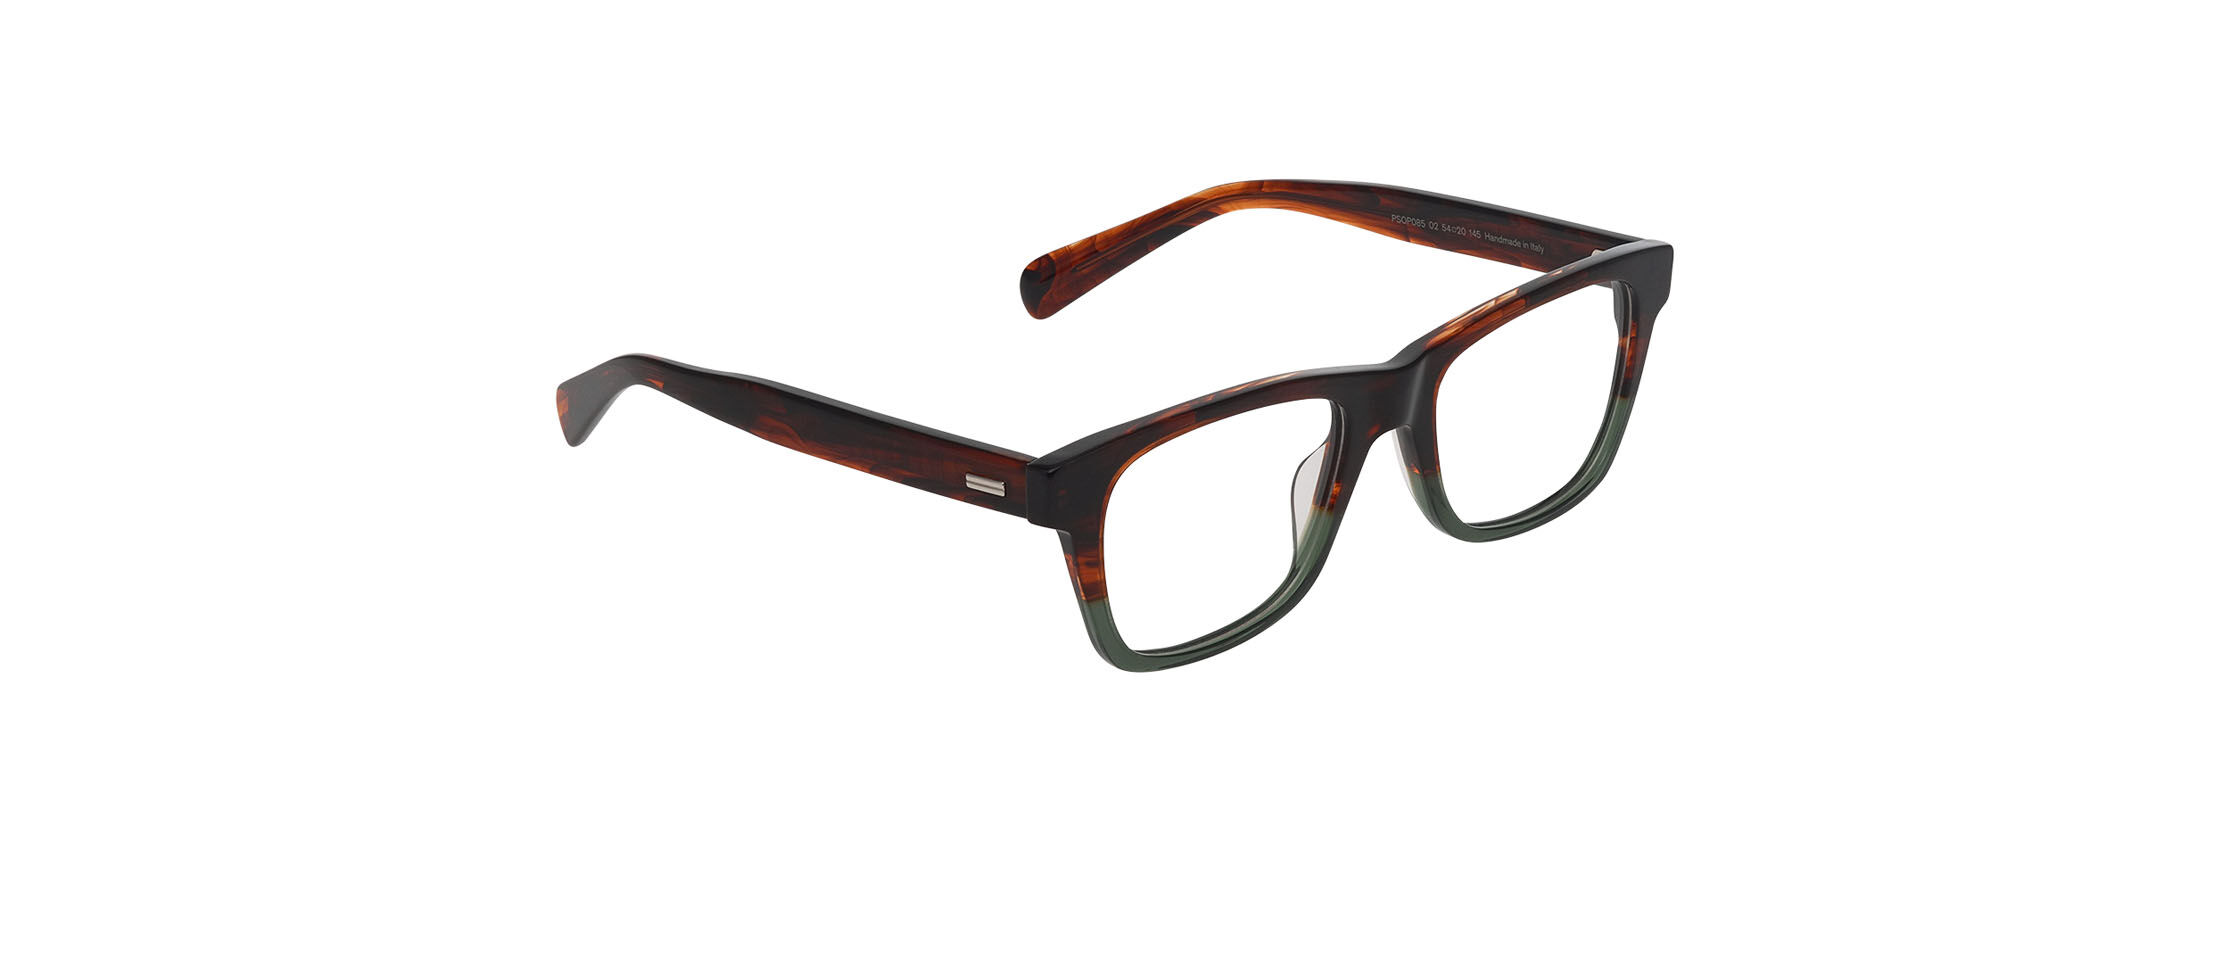 Paul Smith PSOP08554 FAIRFAX Glasses | Free Shipping and Returns